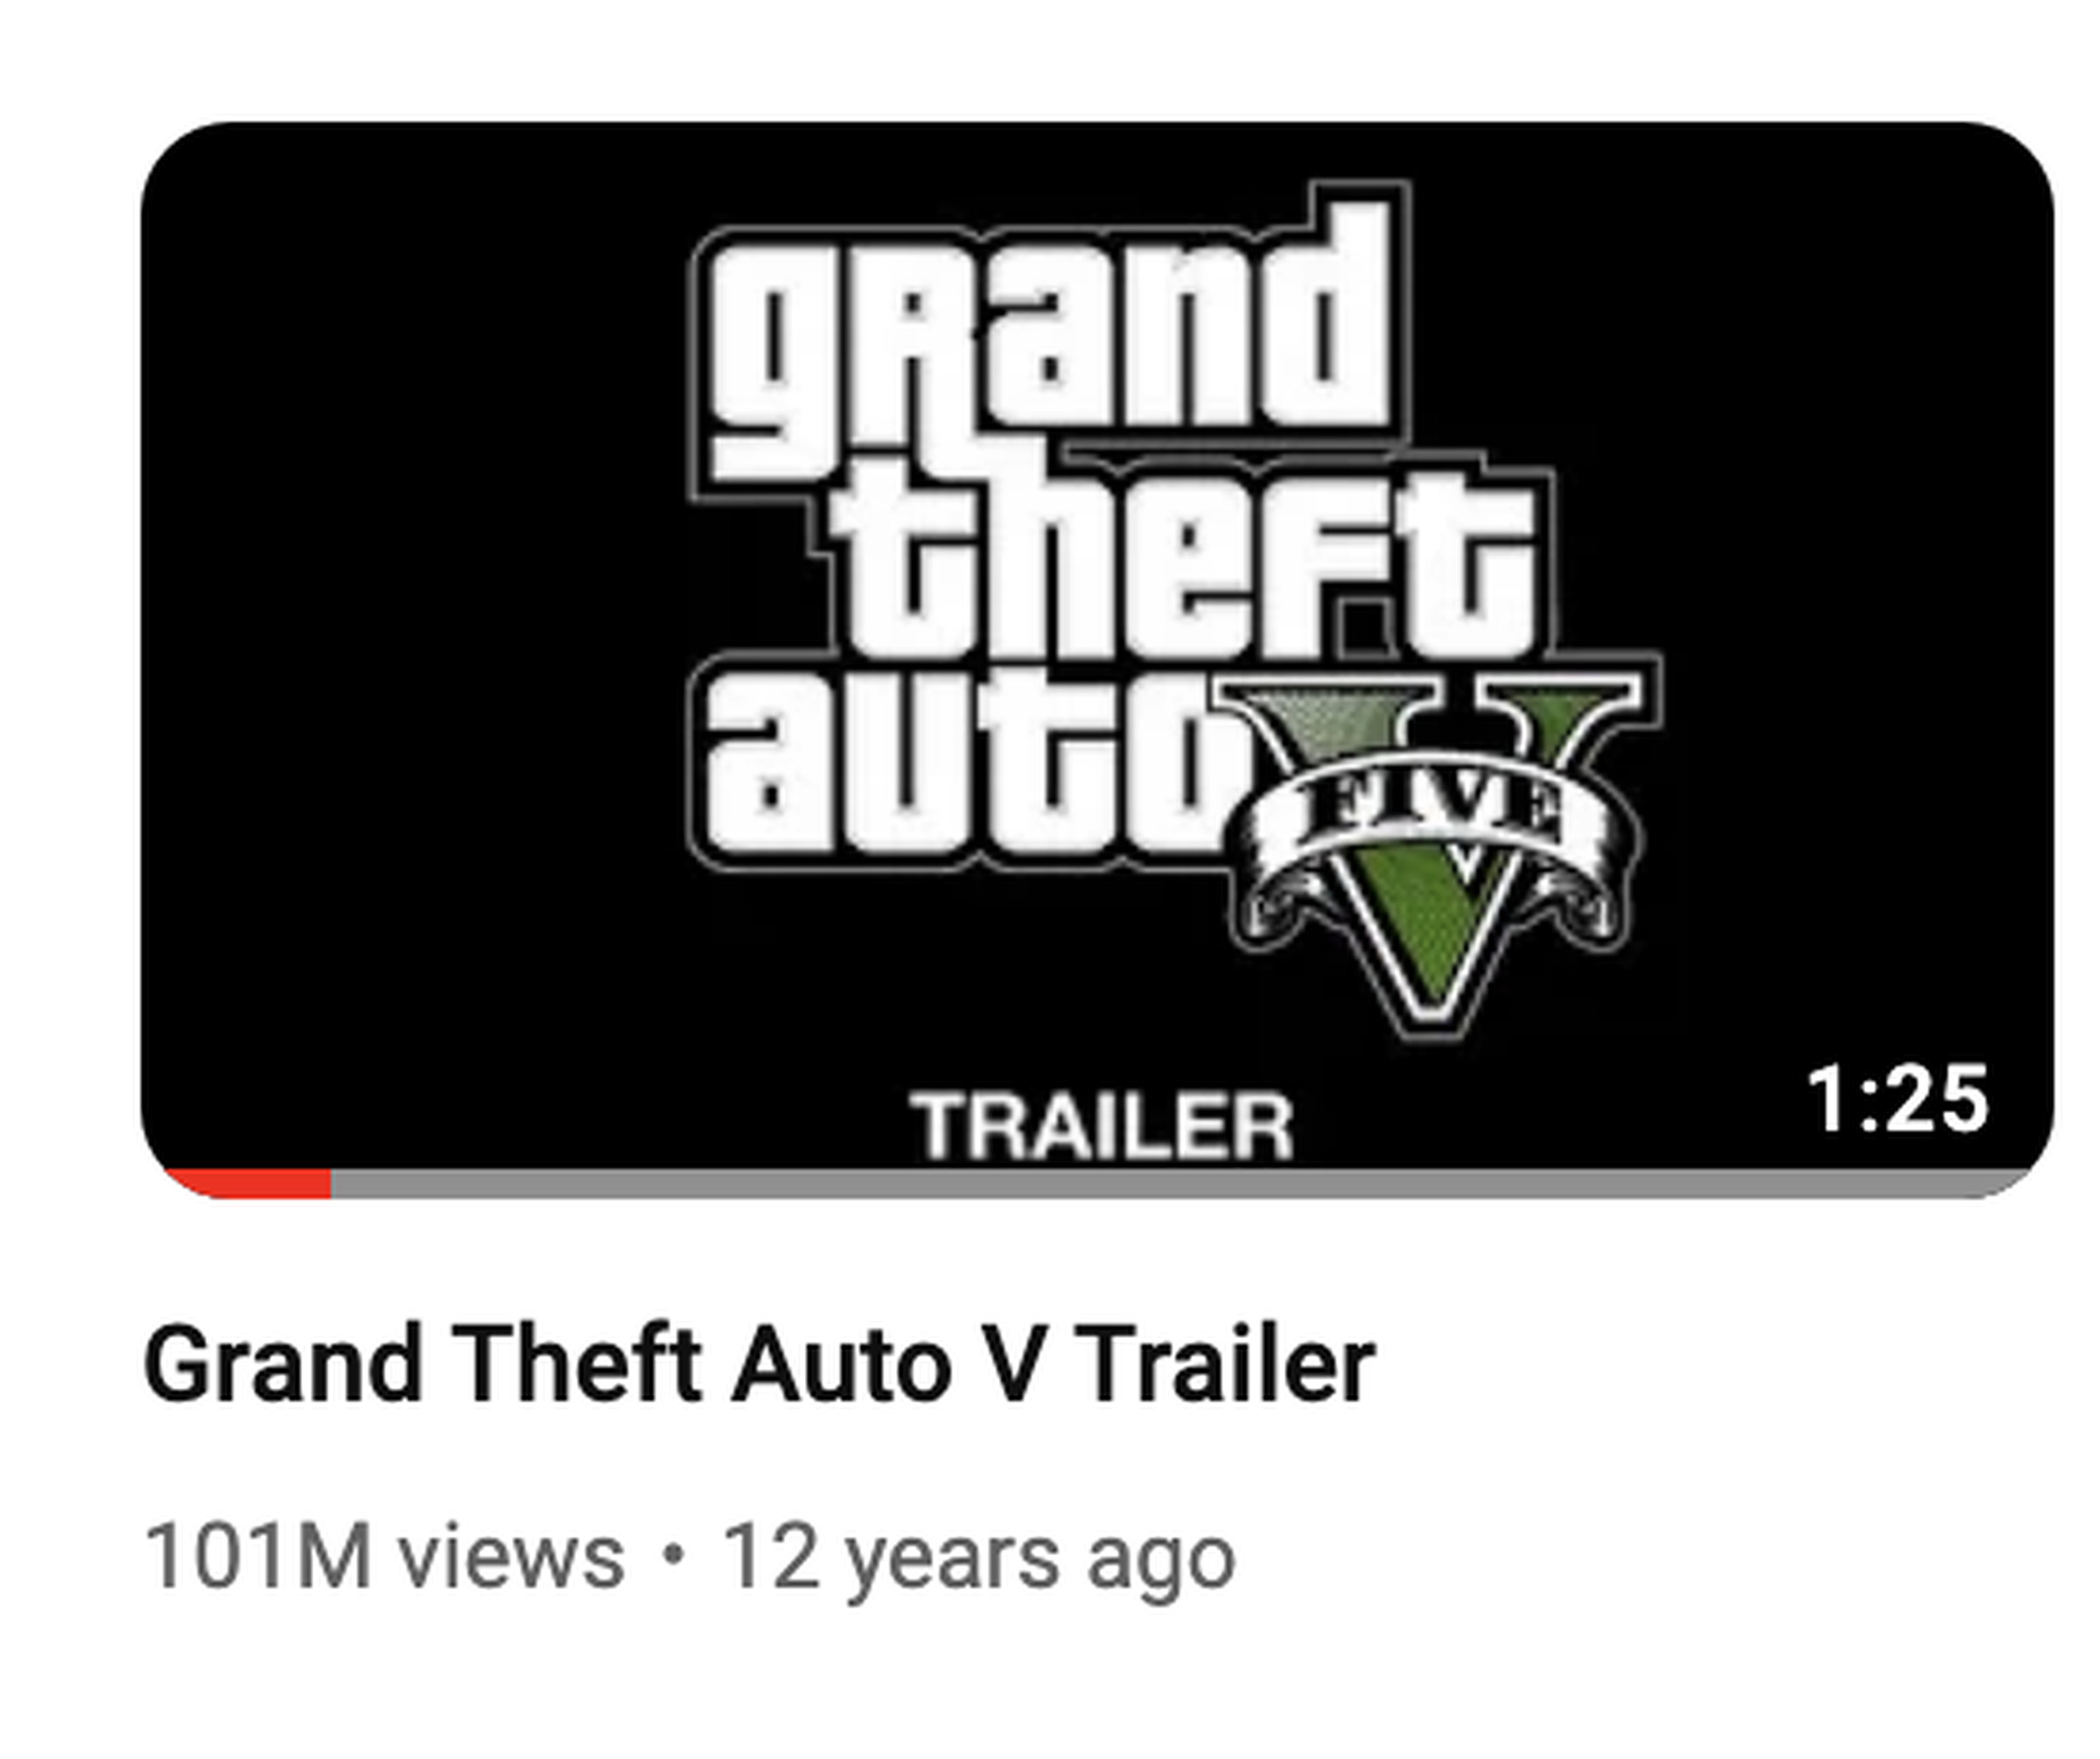 Screenshot of YouTube thumbnail featuring the view number for the GTA V trailer which is 101 million views.